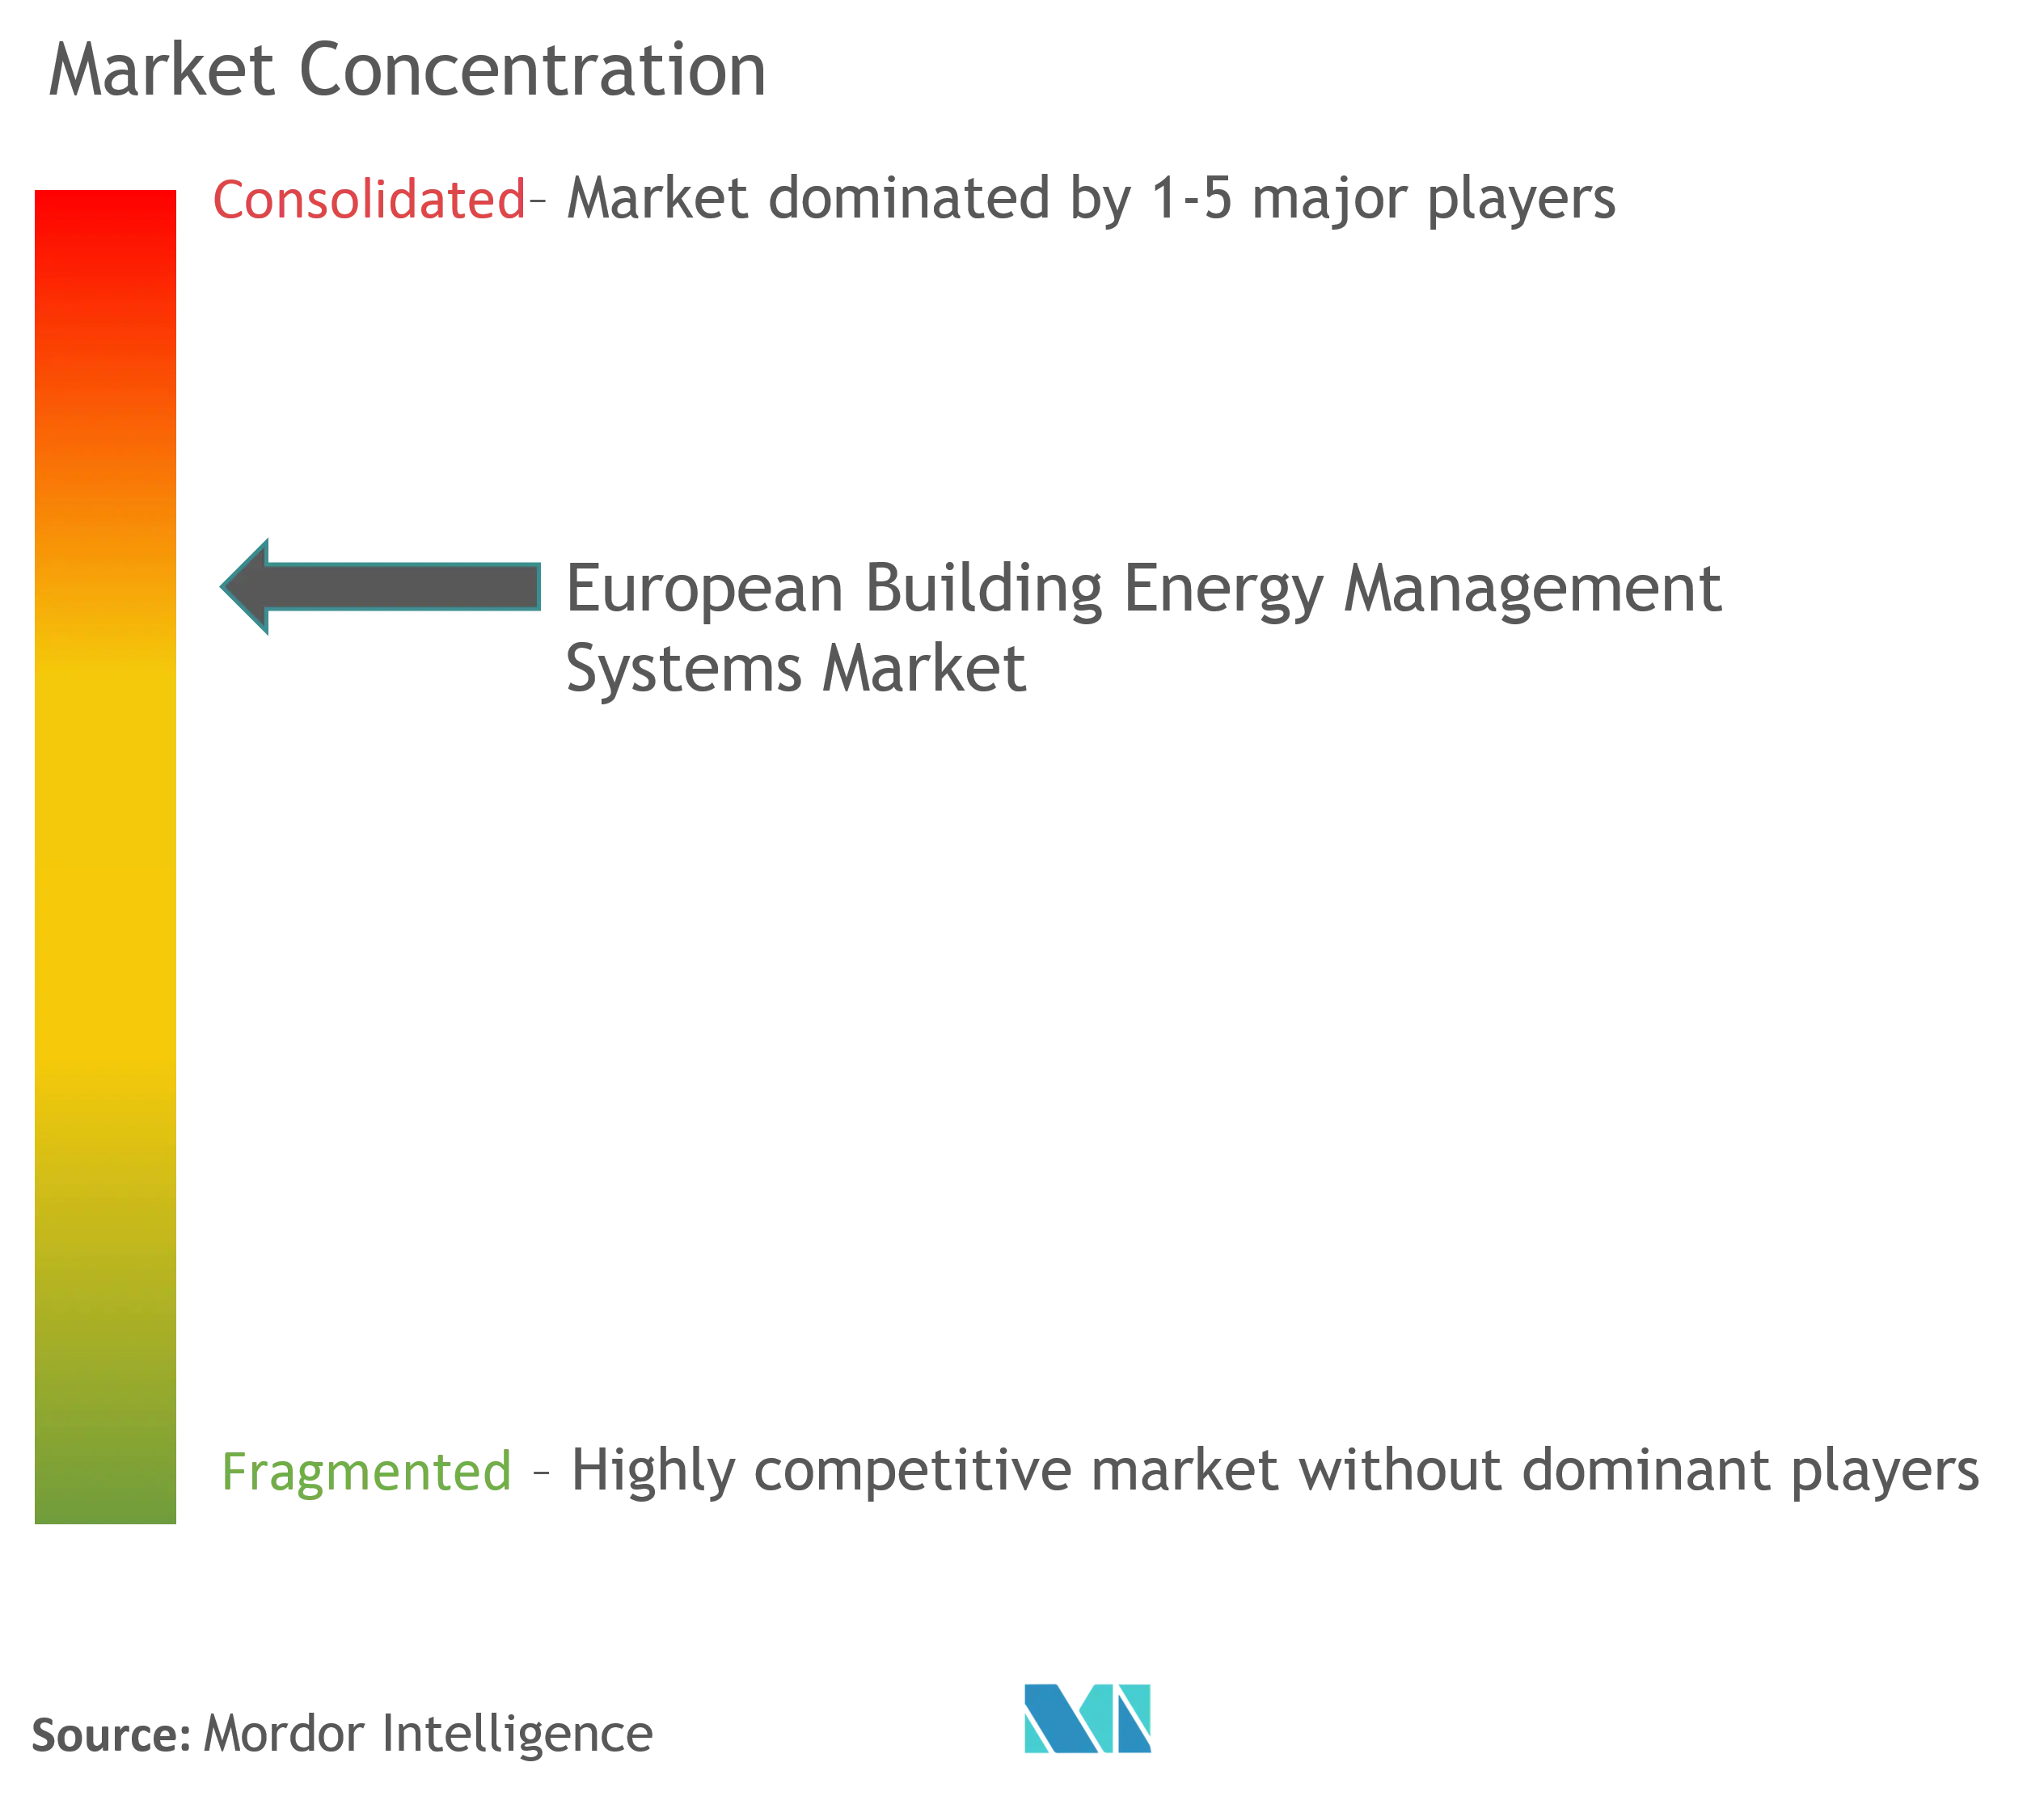 Europe Building Energy Management Systems Market Concentration